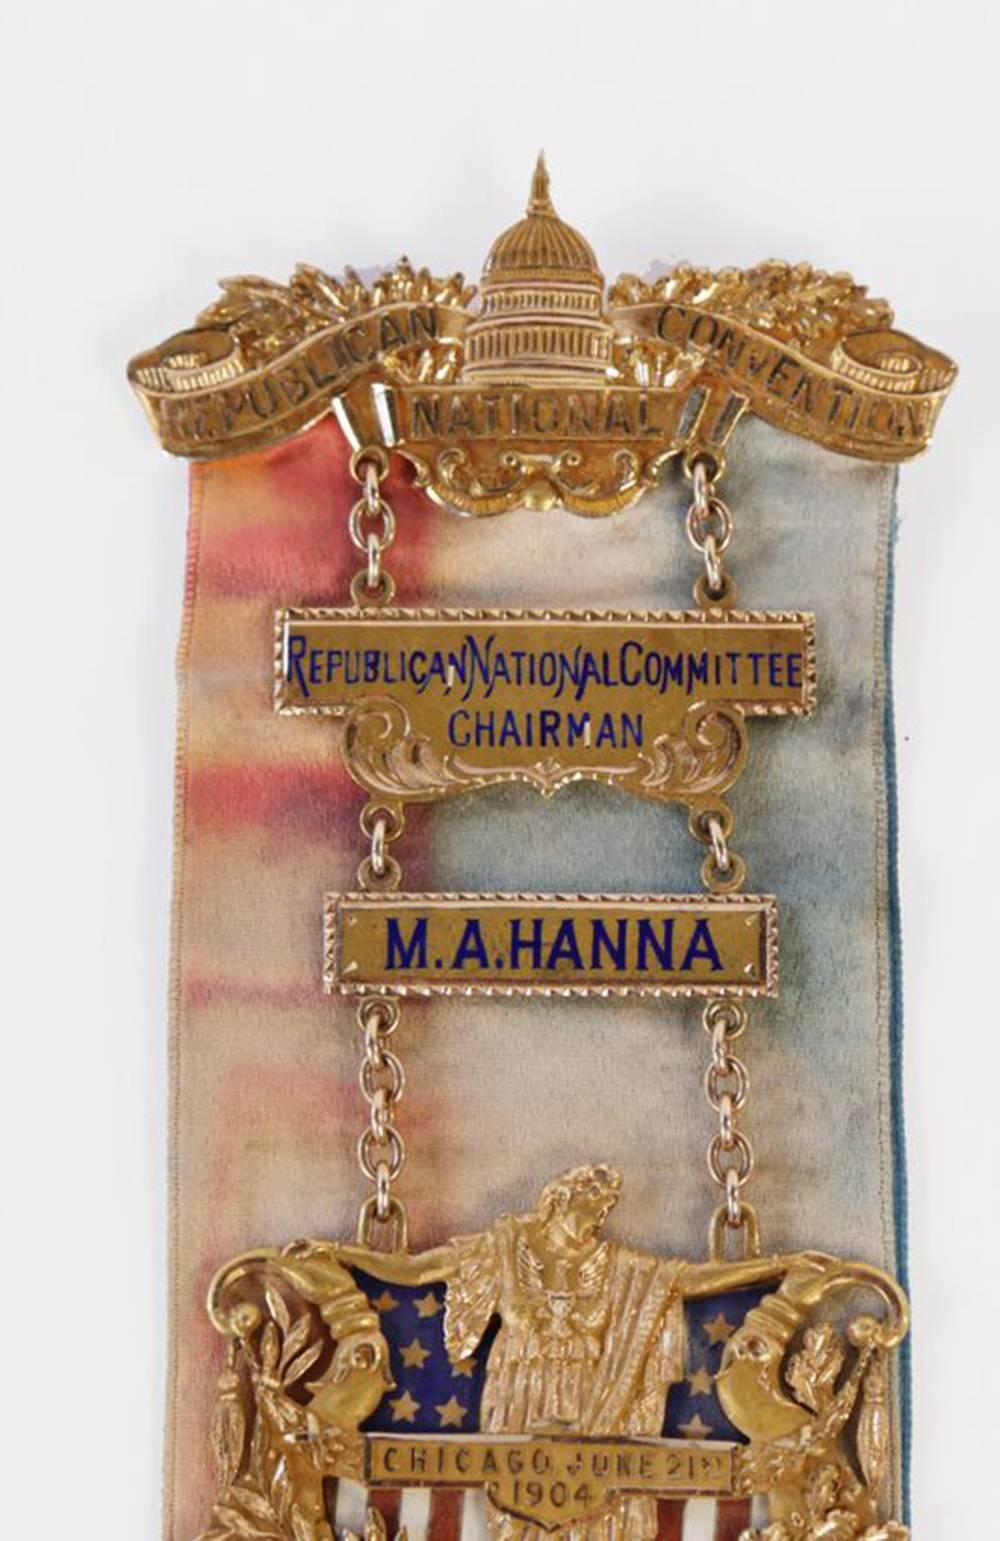 Mark Hanna’s 14-karat yellow gold and enamel chairman’s badge for the Republican National Convention, Chicago, June 21-23, 1904.

Made in anticipation of, or as a commemorative medal for Mark Hanna, as he died in February of 1904, before the